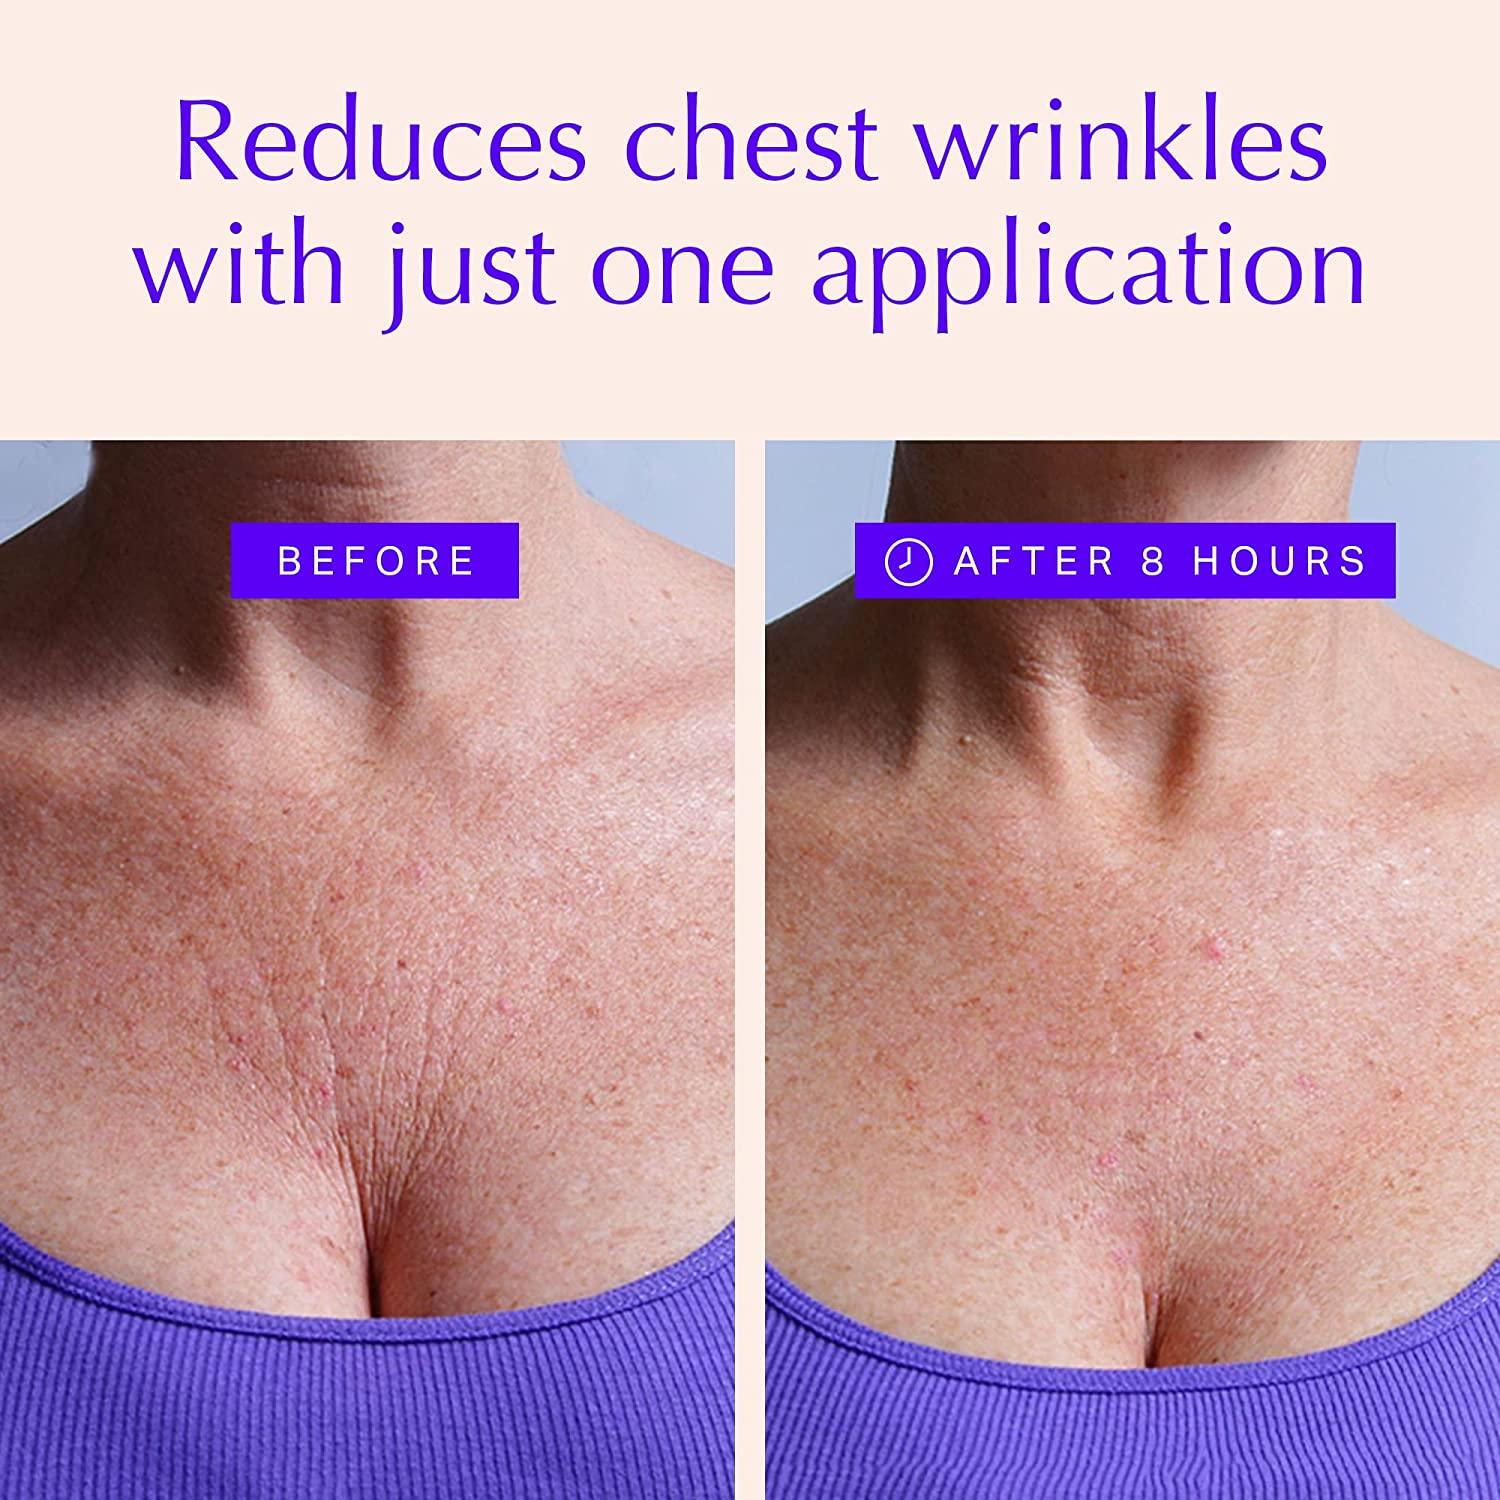 Chest Wrinkle Pads - Anti-Aging Advanced Skin Firming Tightening